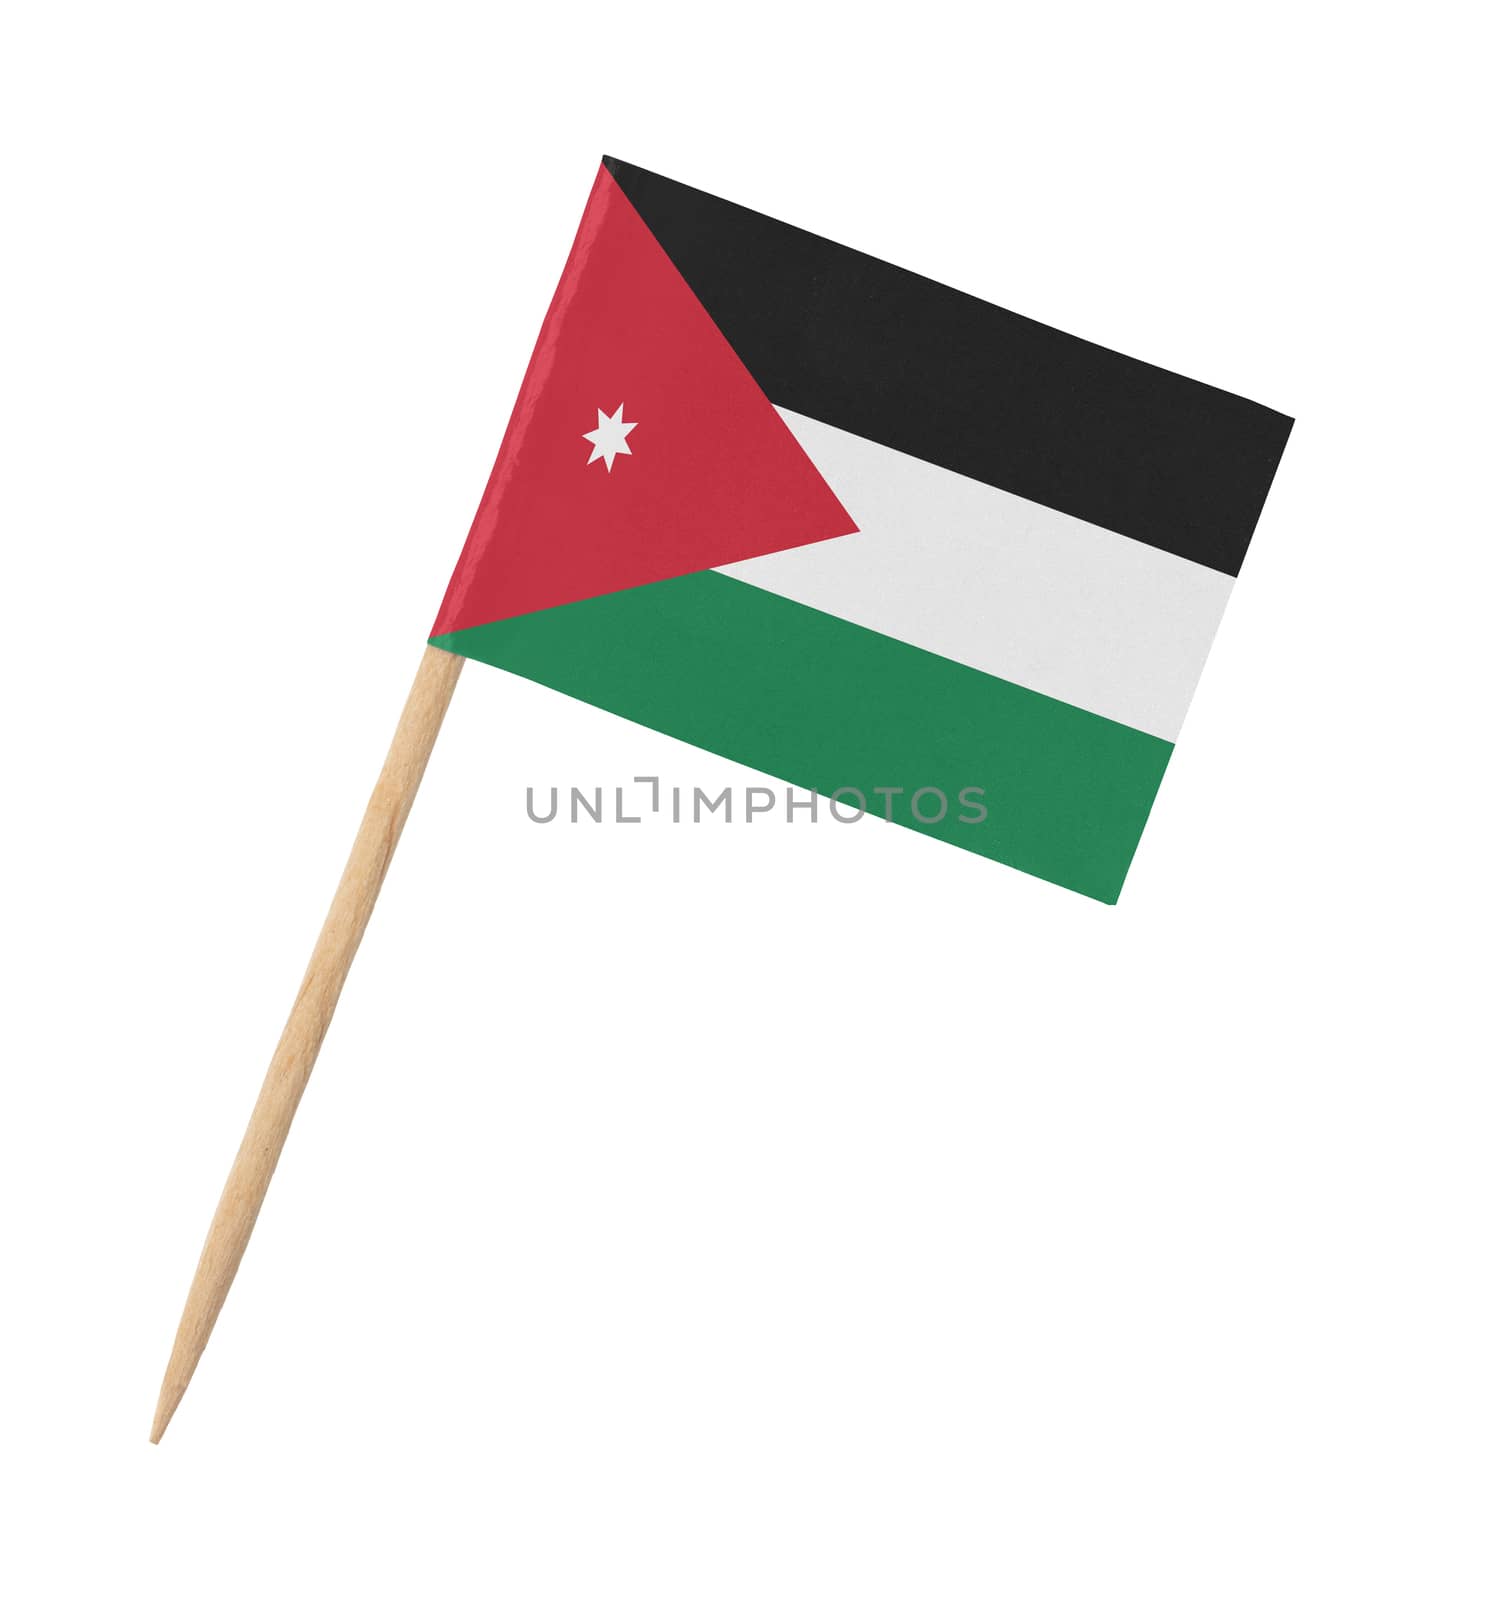 Small paper Jordanian flag on wooden stick by michaklootwijk